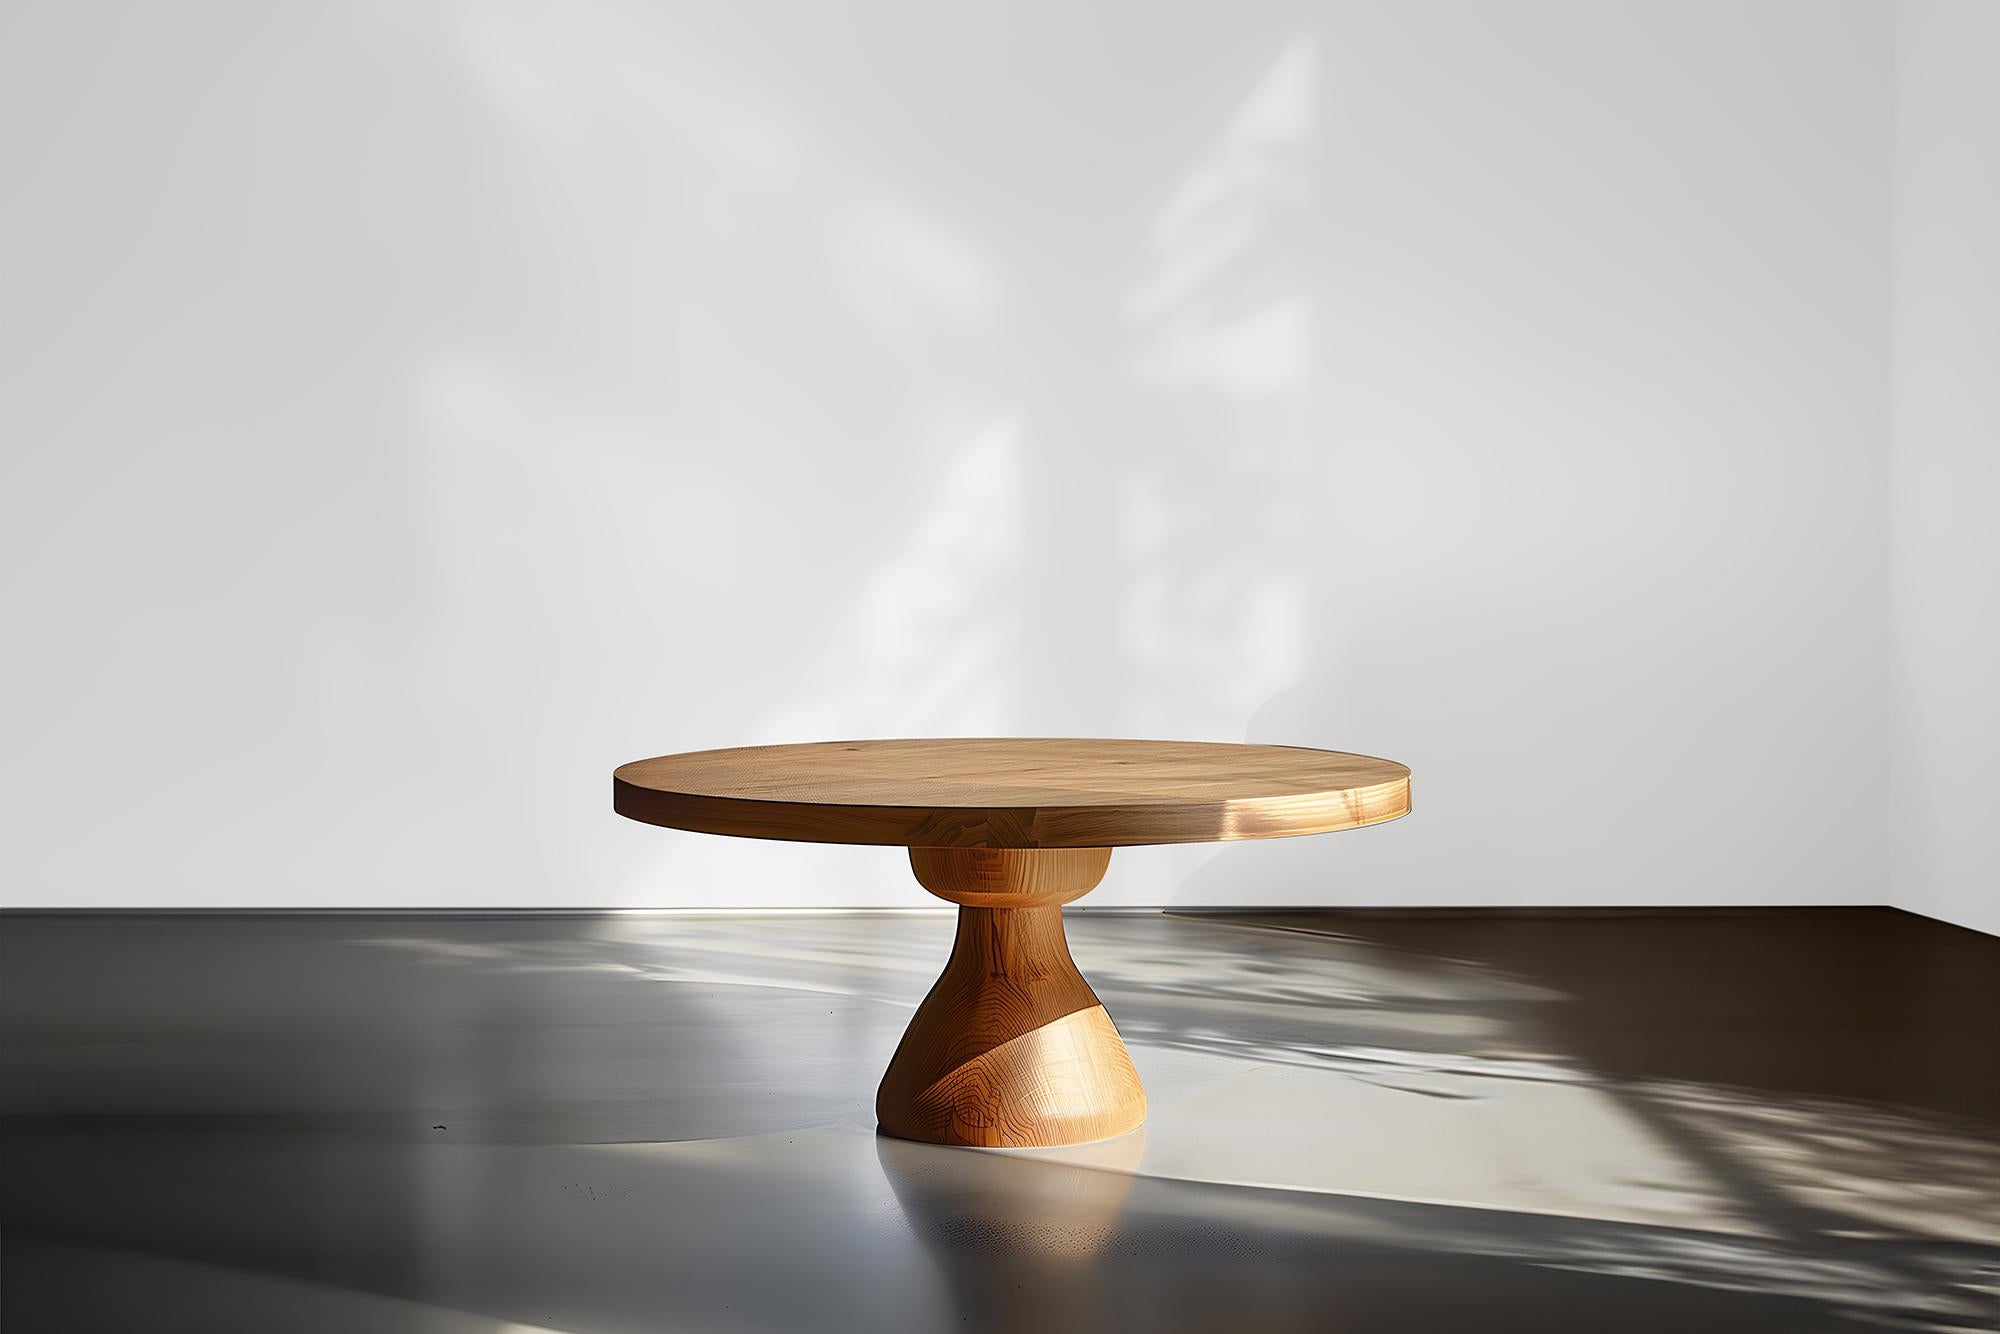 Game Time Excellence, Socle Game Tables in Solid Wood by NONO No26

——

Introducing the 